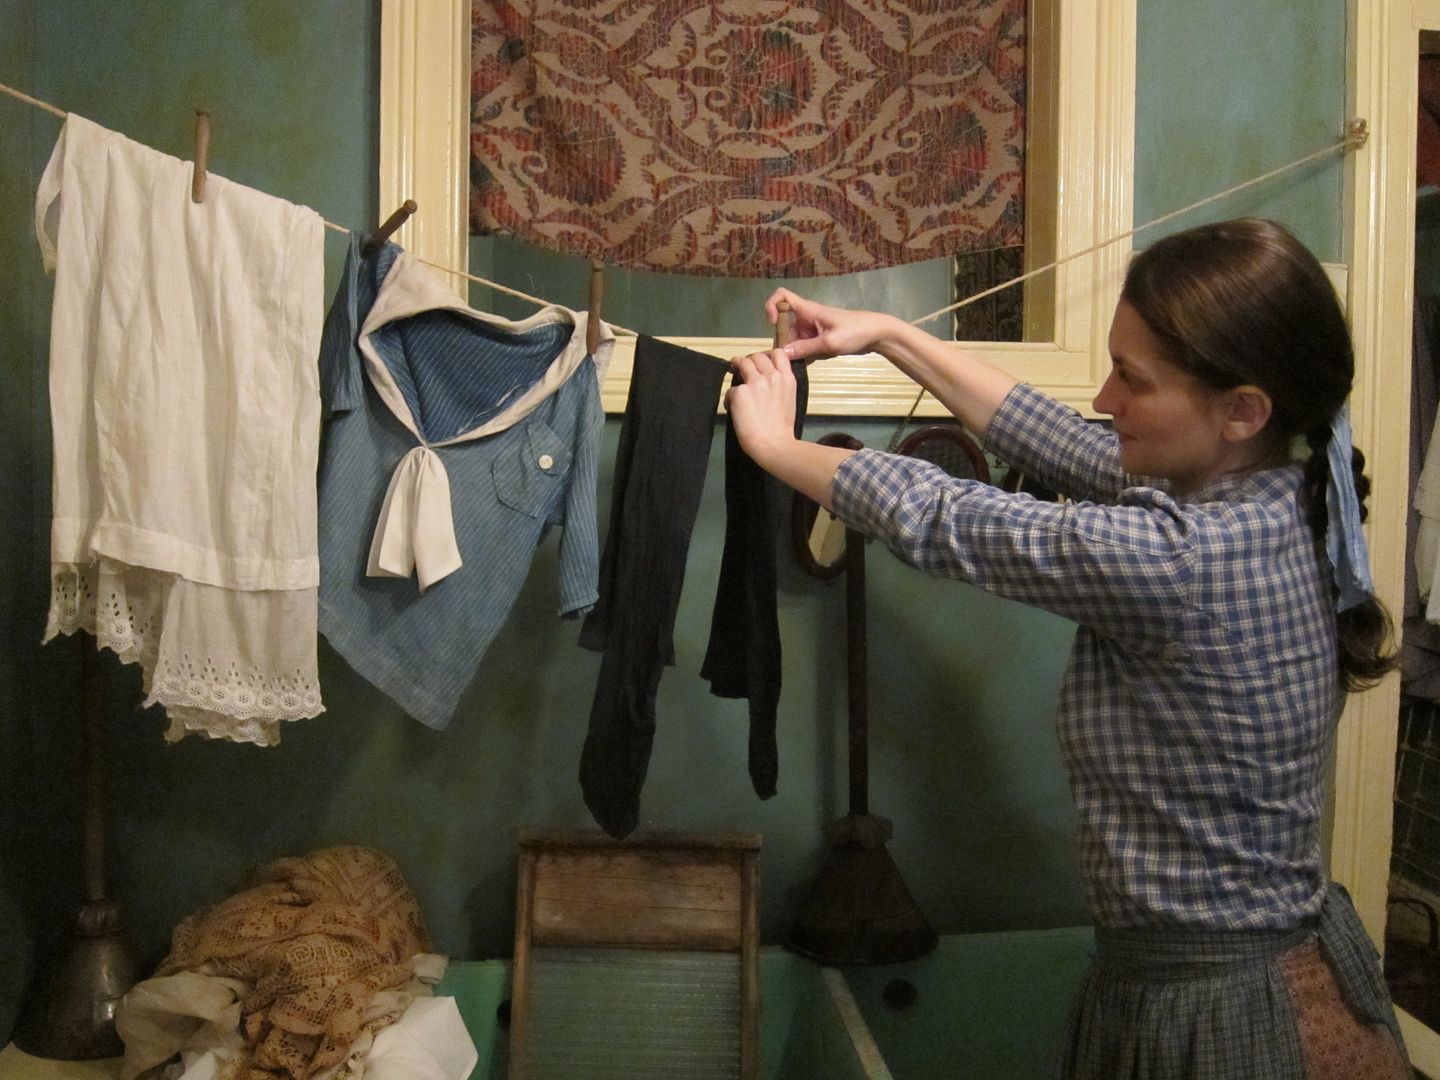 Tenement Museum of LES: Amazing reenactments of actual former residents